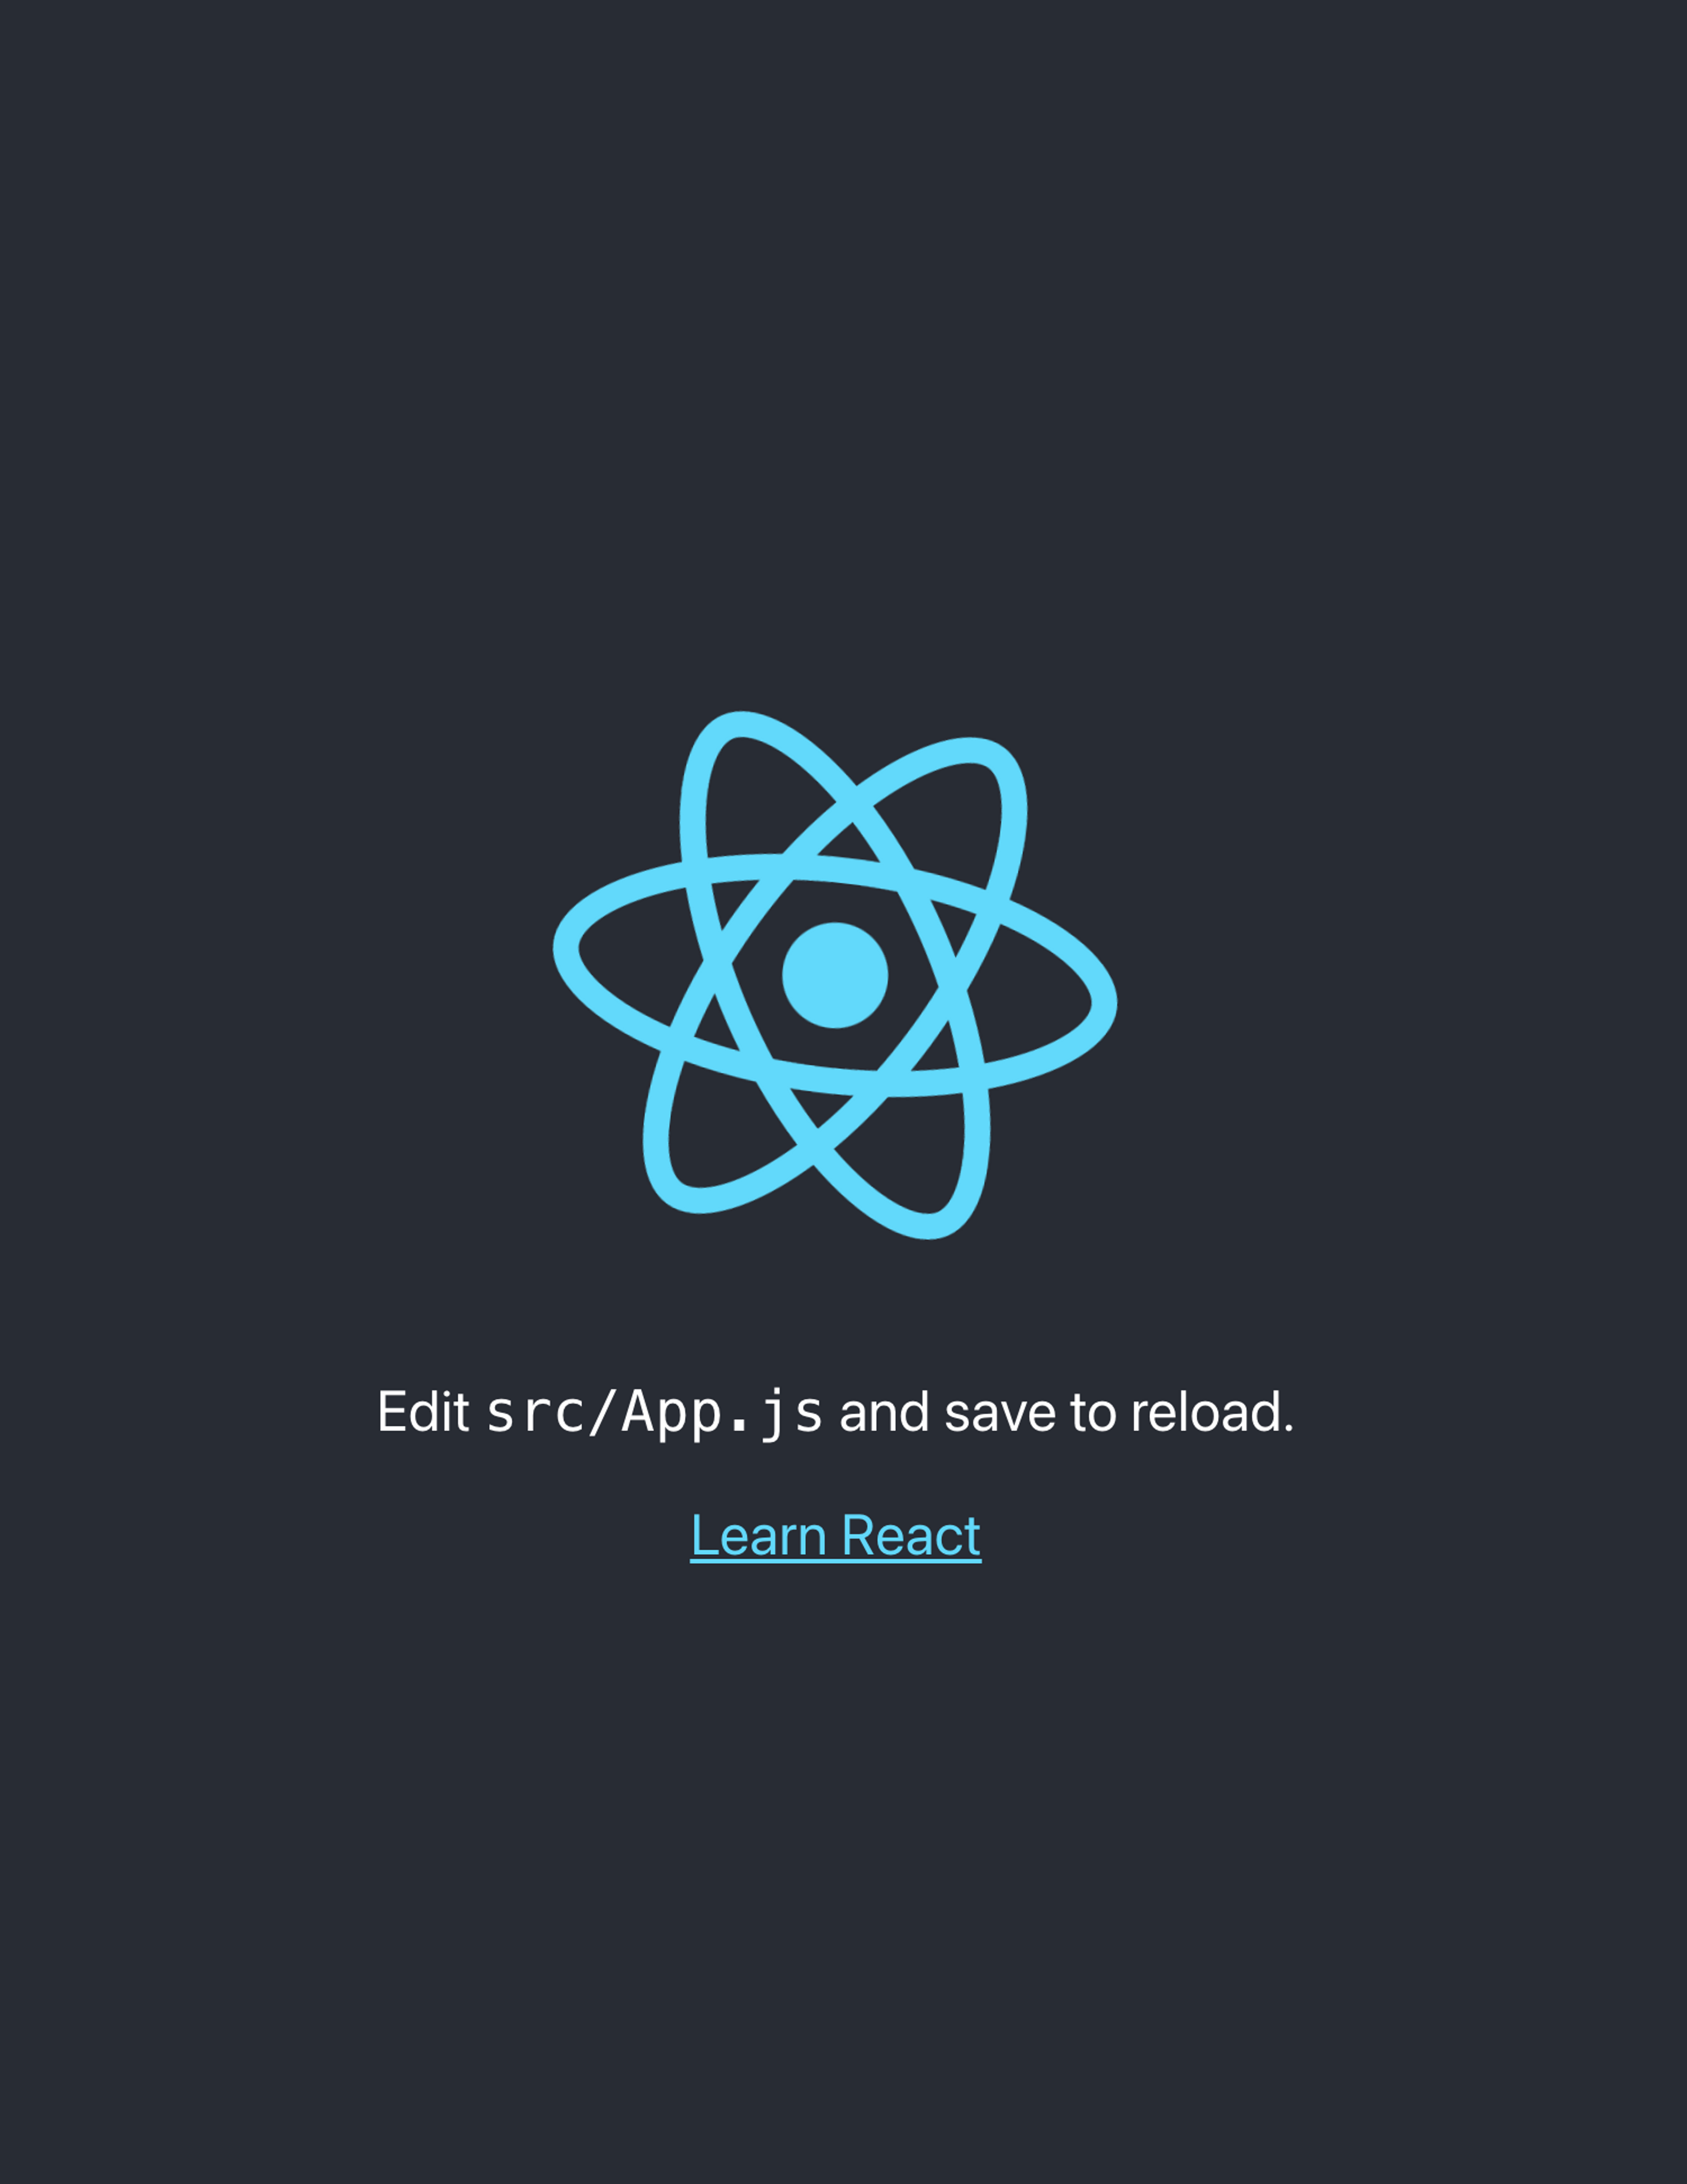 Plain React starter page with React logo and the text "Edit src/Ap.js and save to reload."